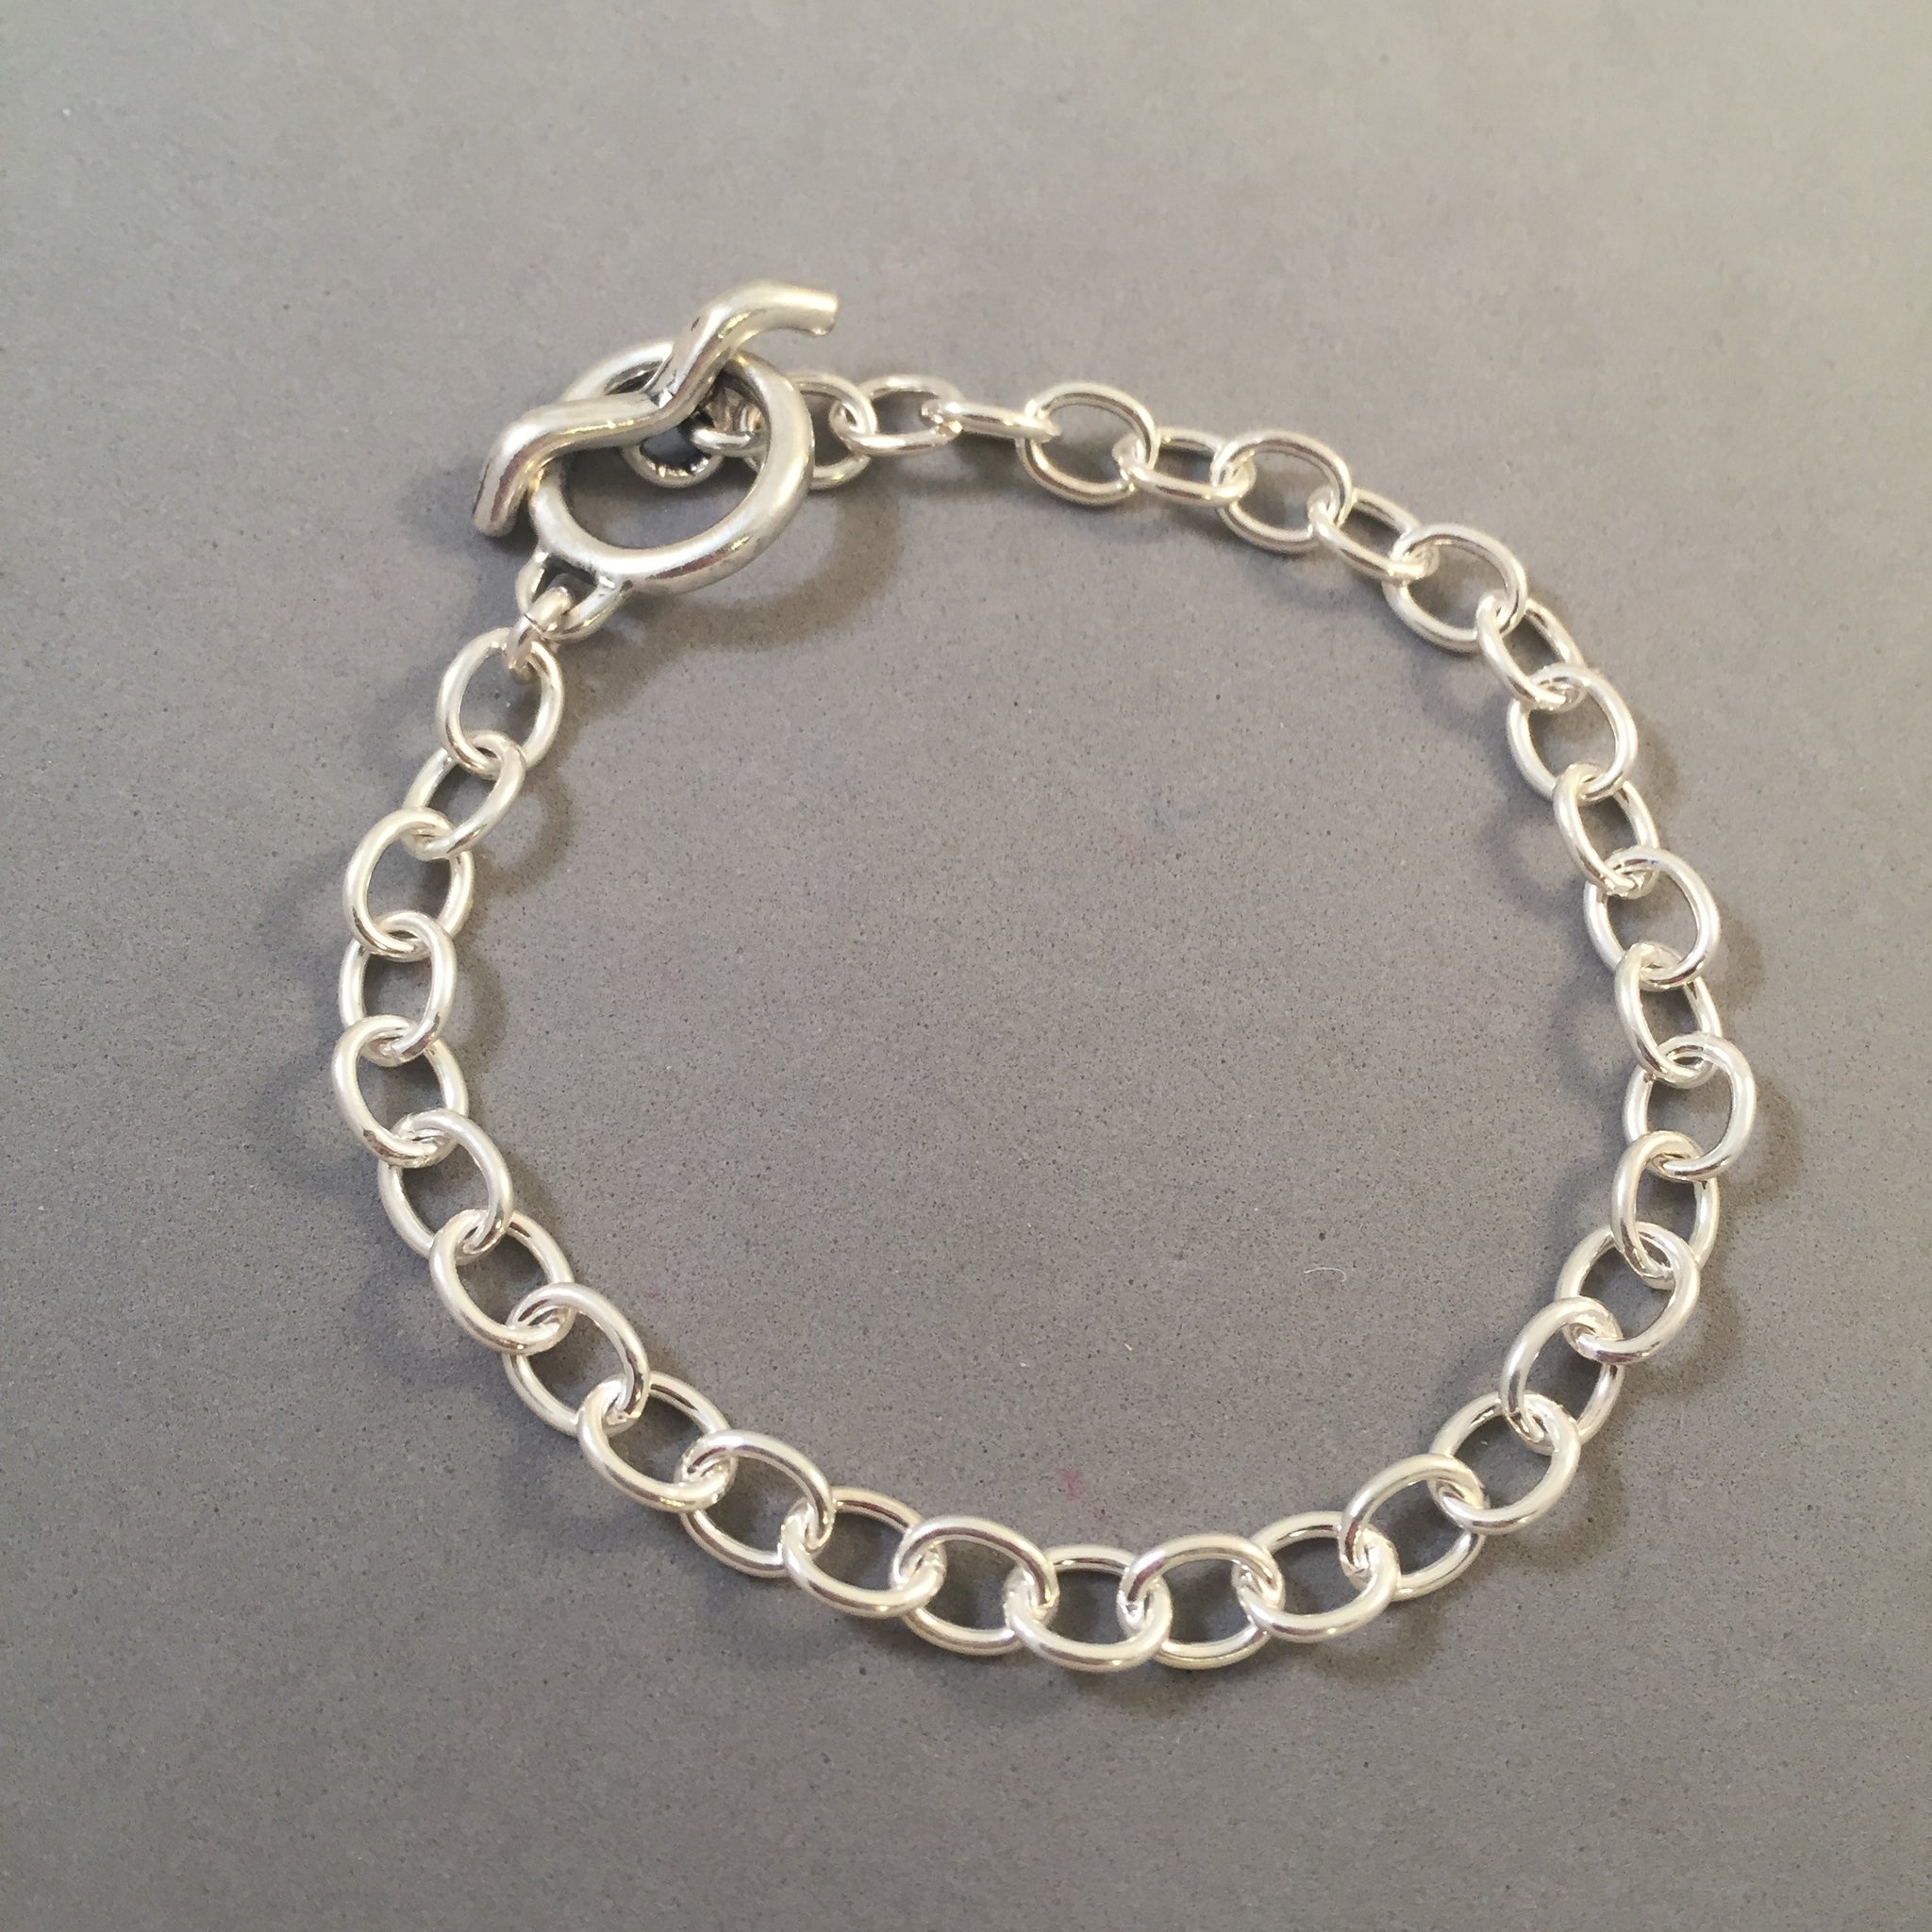 Charm Bracelet Medium Oval Toggle Clasp .925 Sterling Silver Clasp Starter 5x7 mm Loop Link 7- 8 CB03 7.5